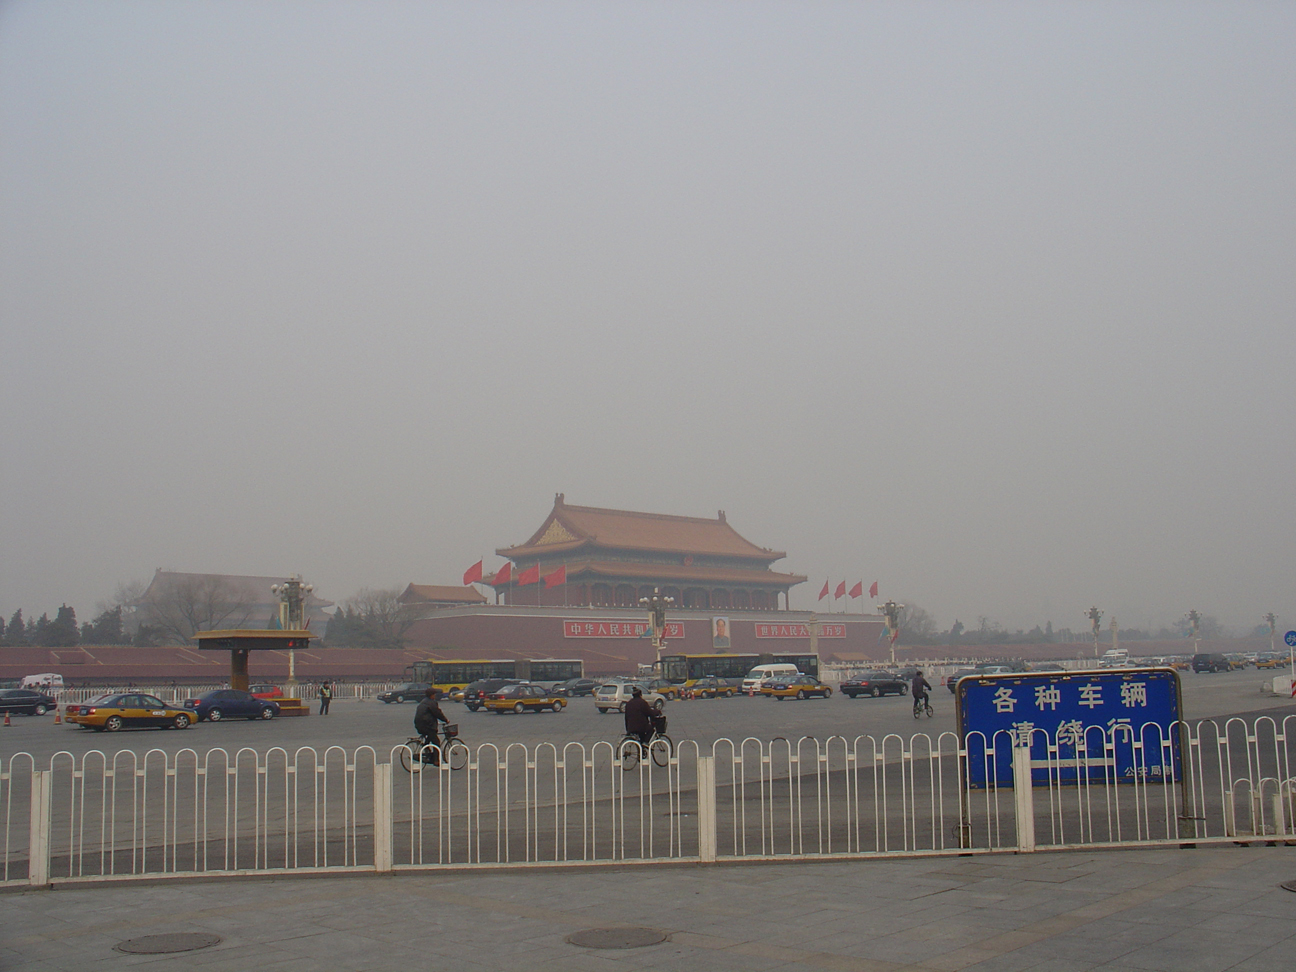 The south entrance of the Forbidden City with a portrait of Mao above the gate